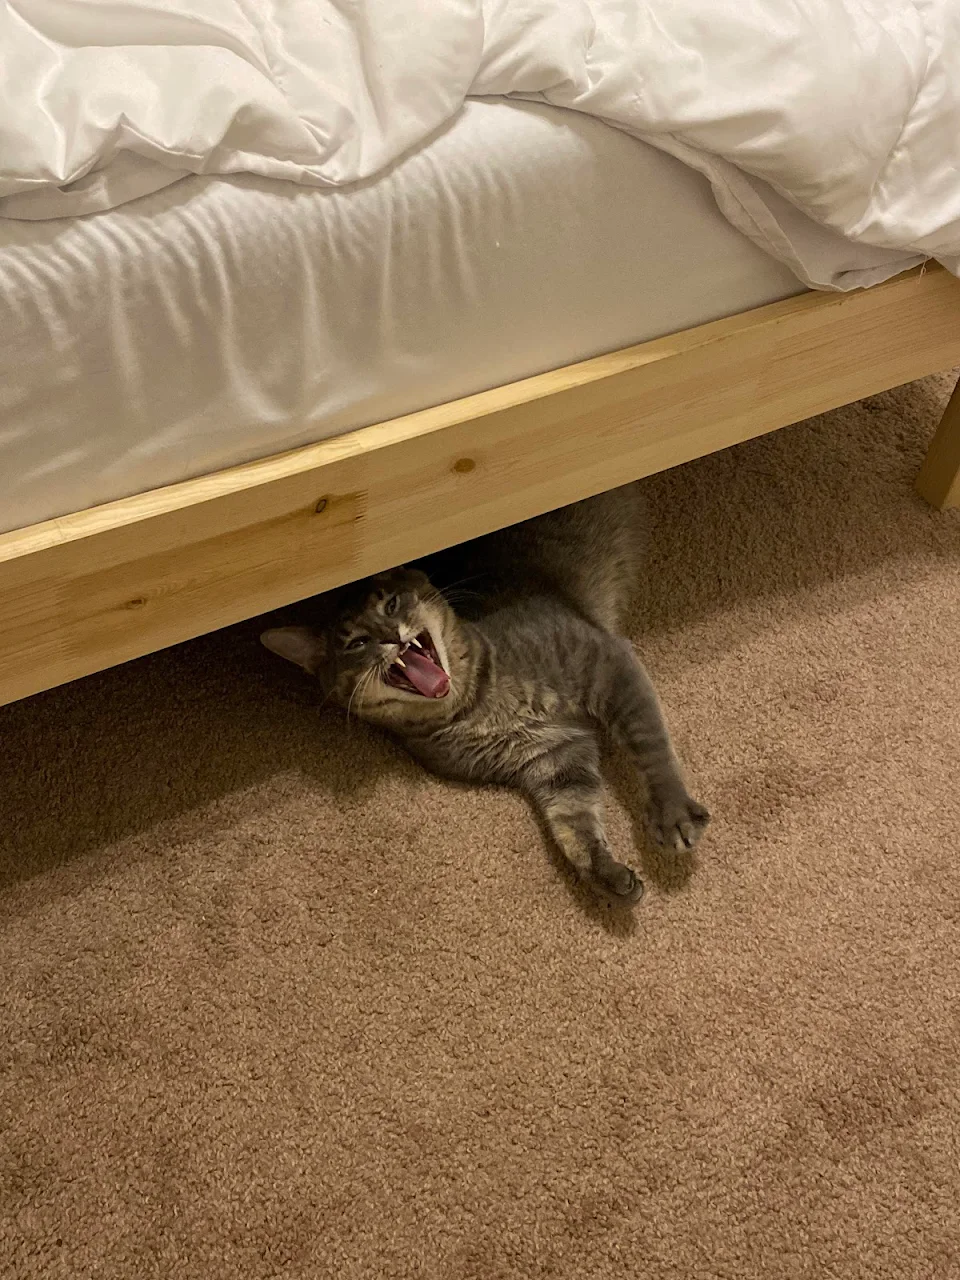 This photo of a cat yawning under a bed.